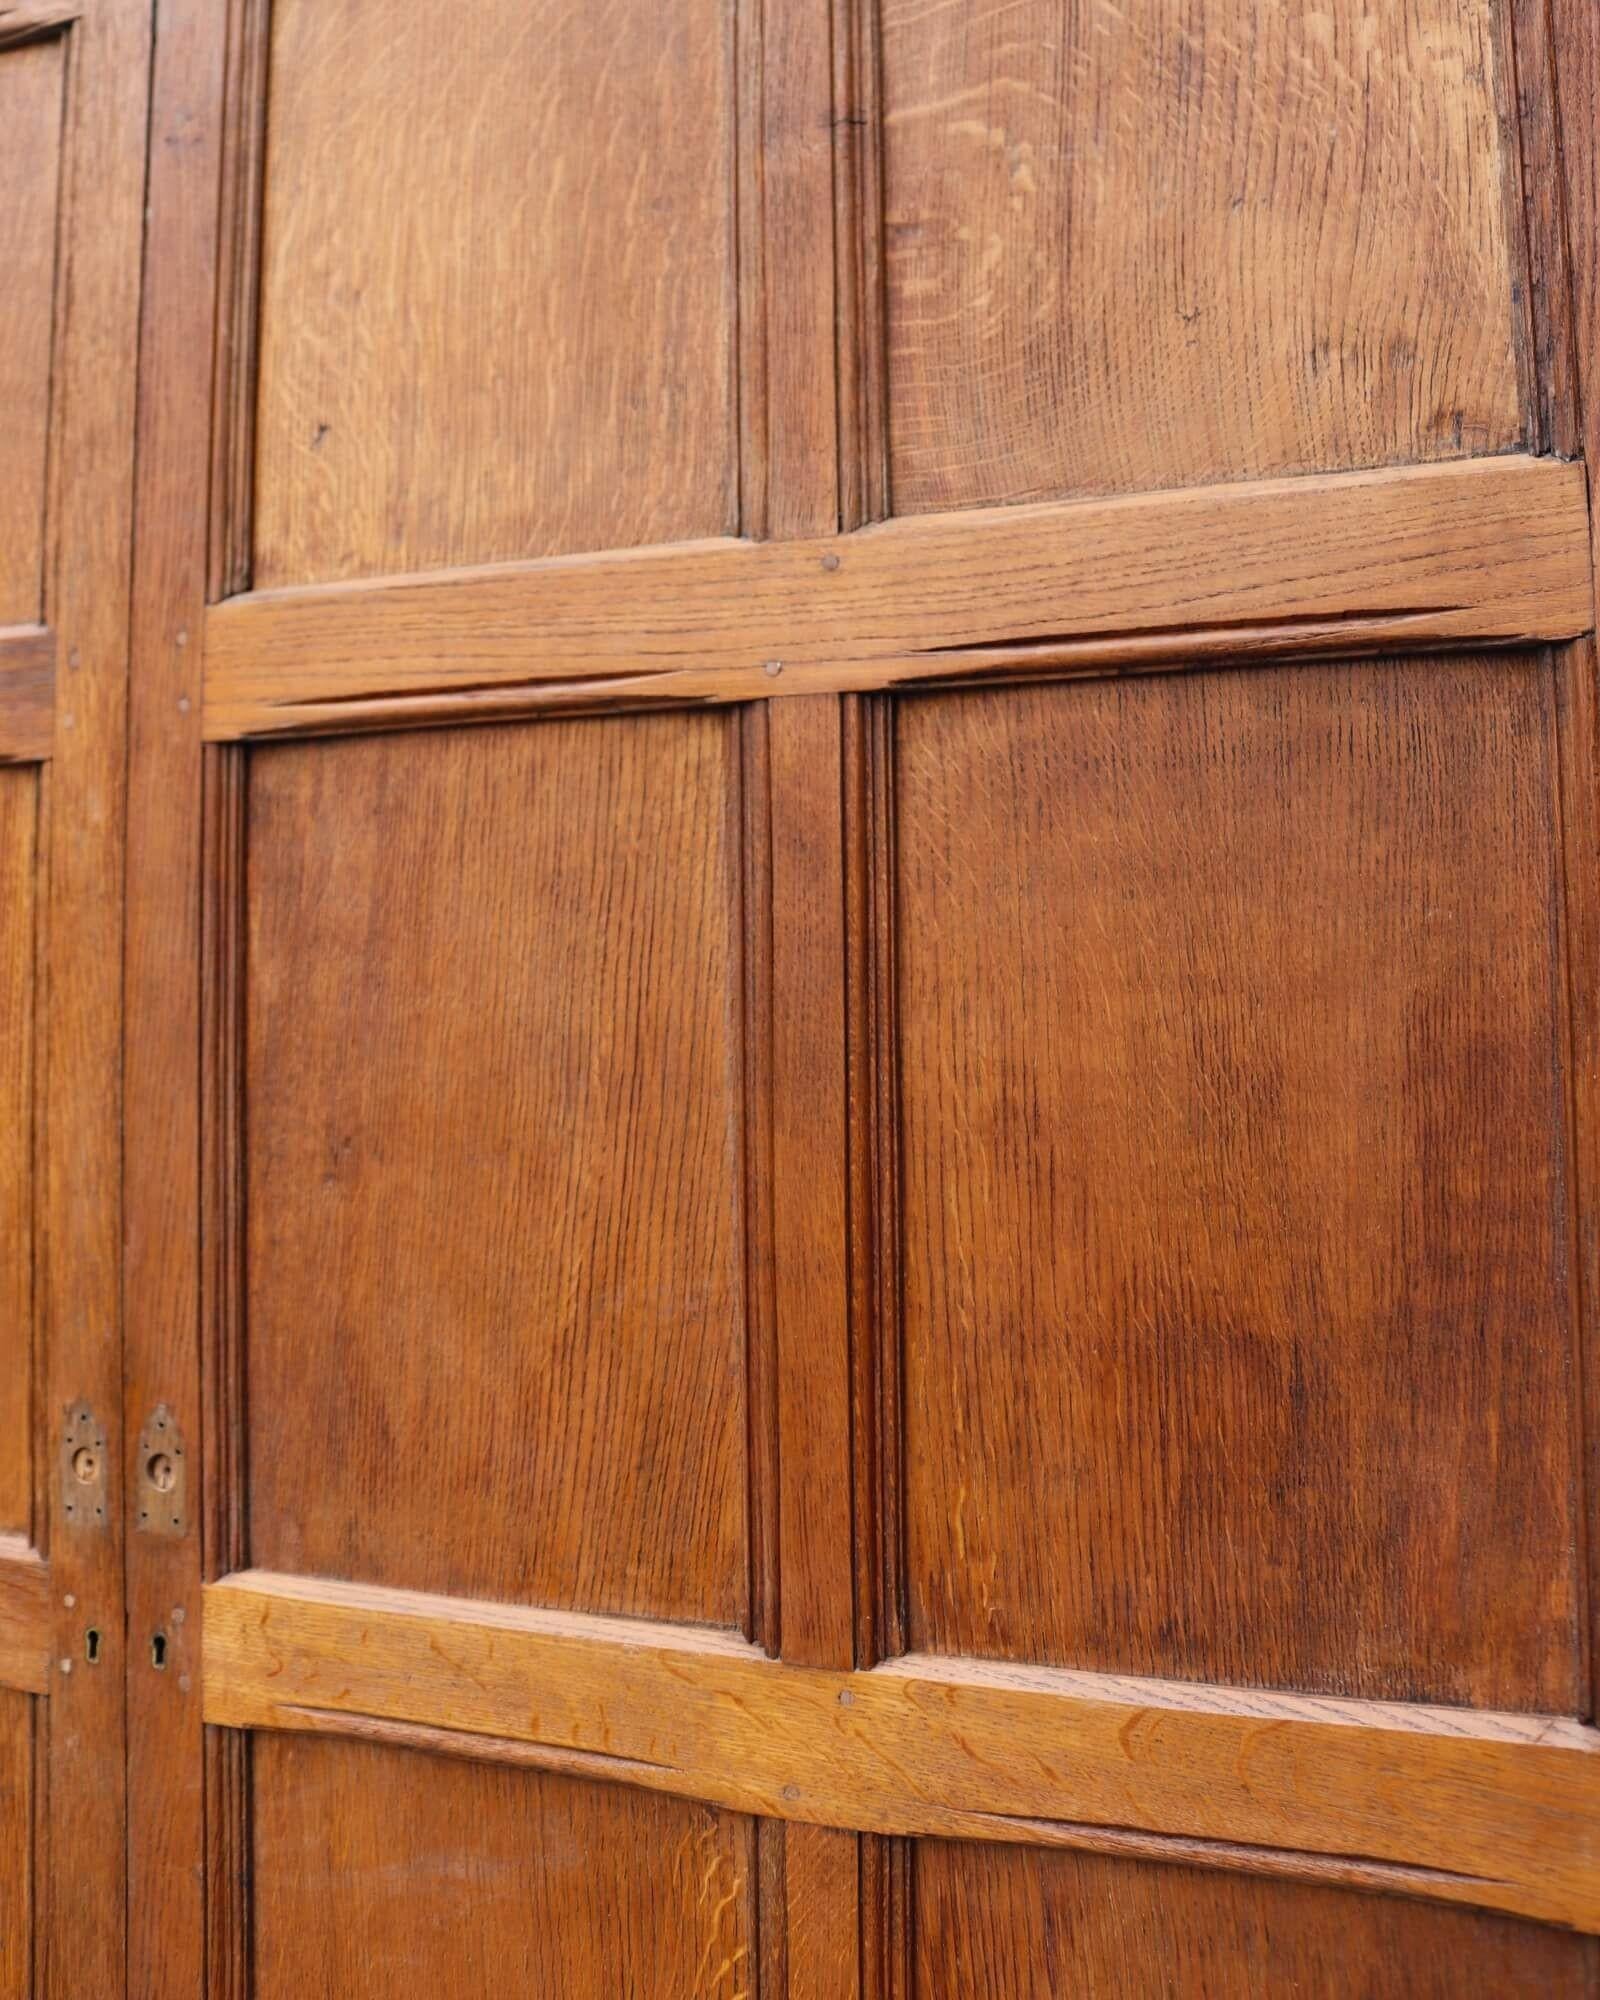 Set of Tudor Style Victorian Oak Double Doors In Fair Condition For Sale In Wormelow, Herefordshire